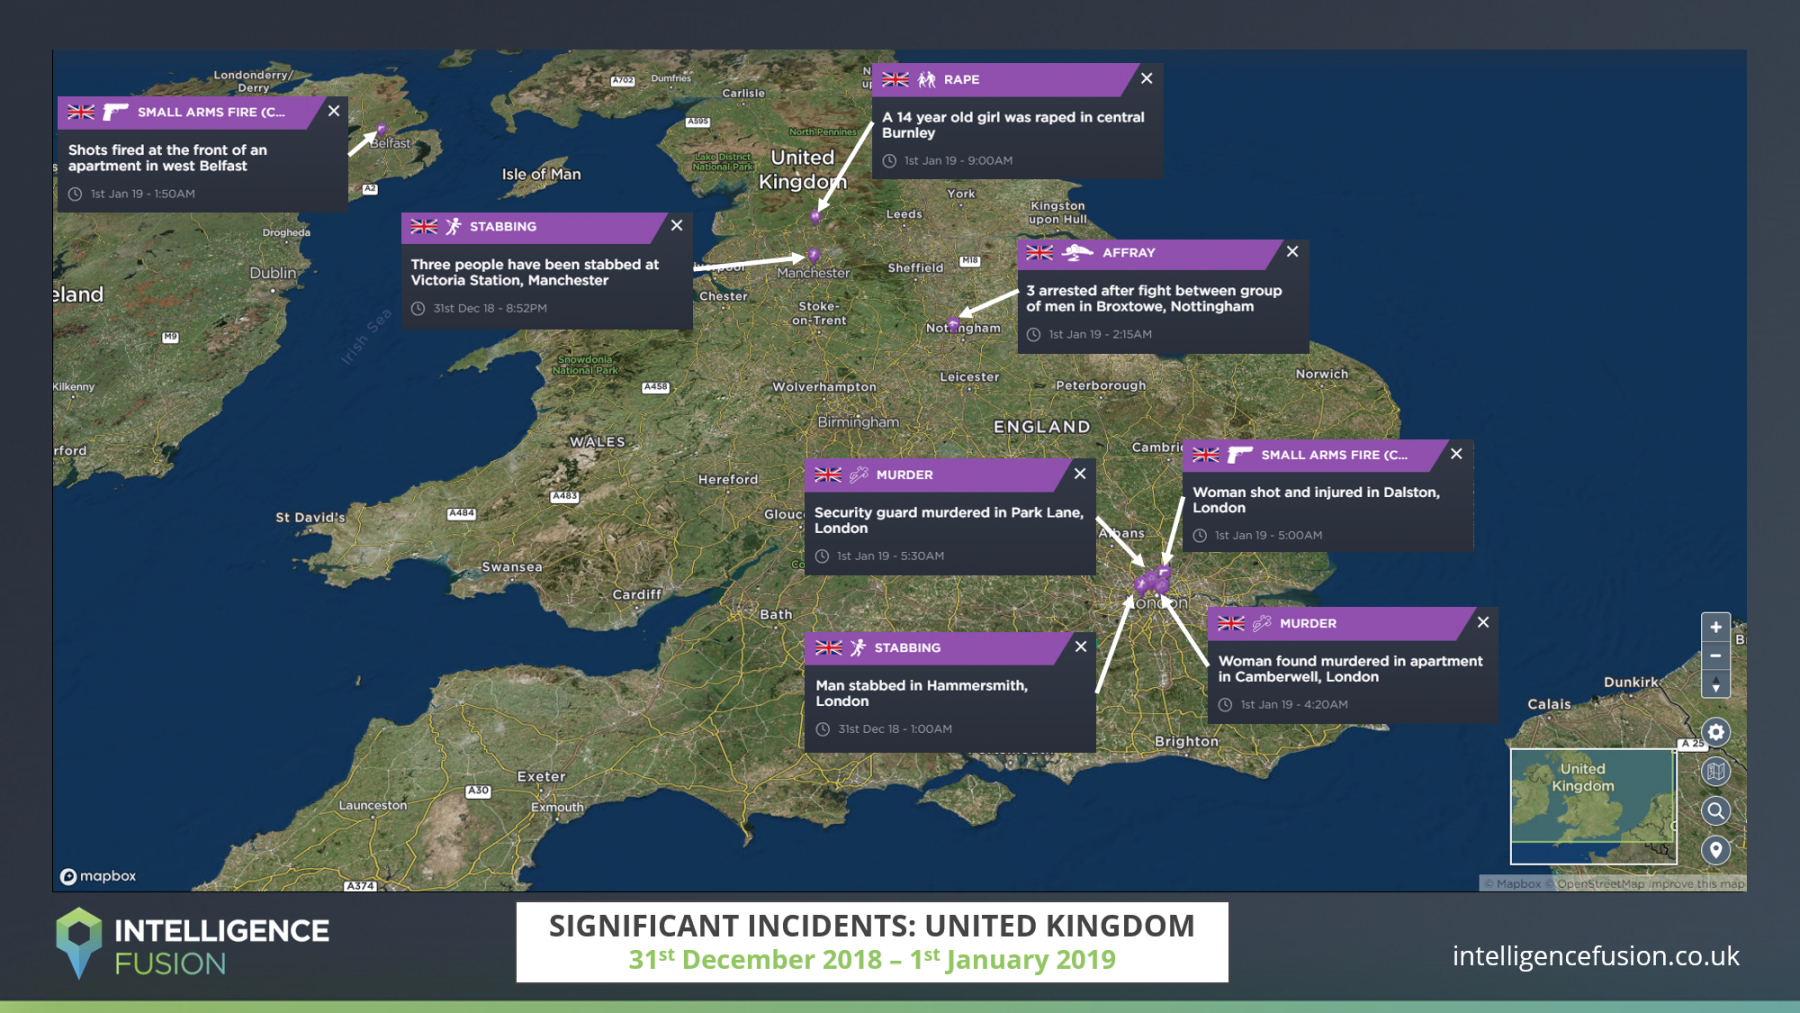 Incidents and crime across the UK including a NYE terror attack in Manchester